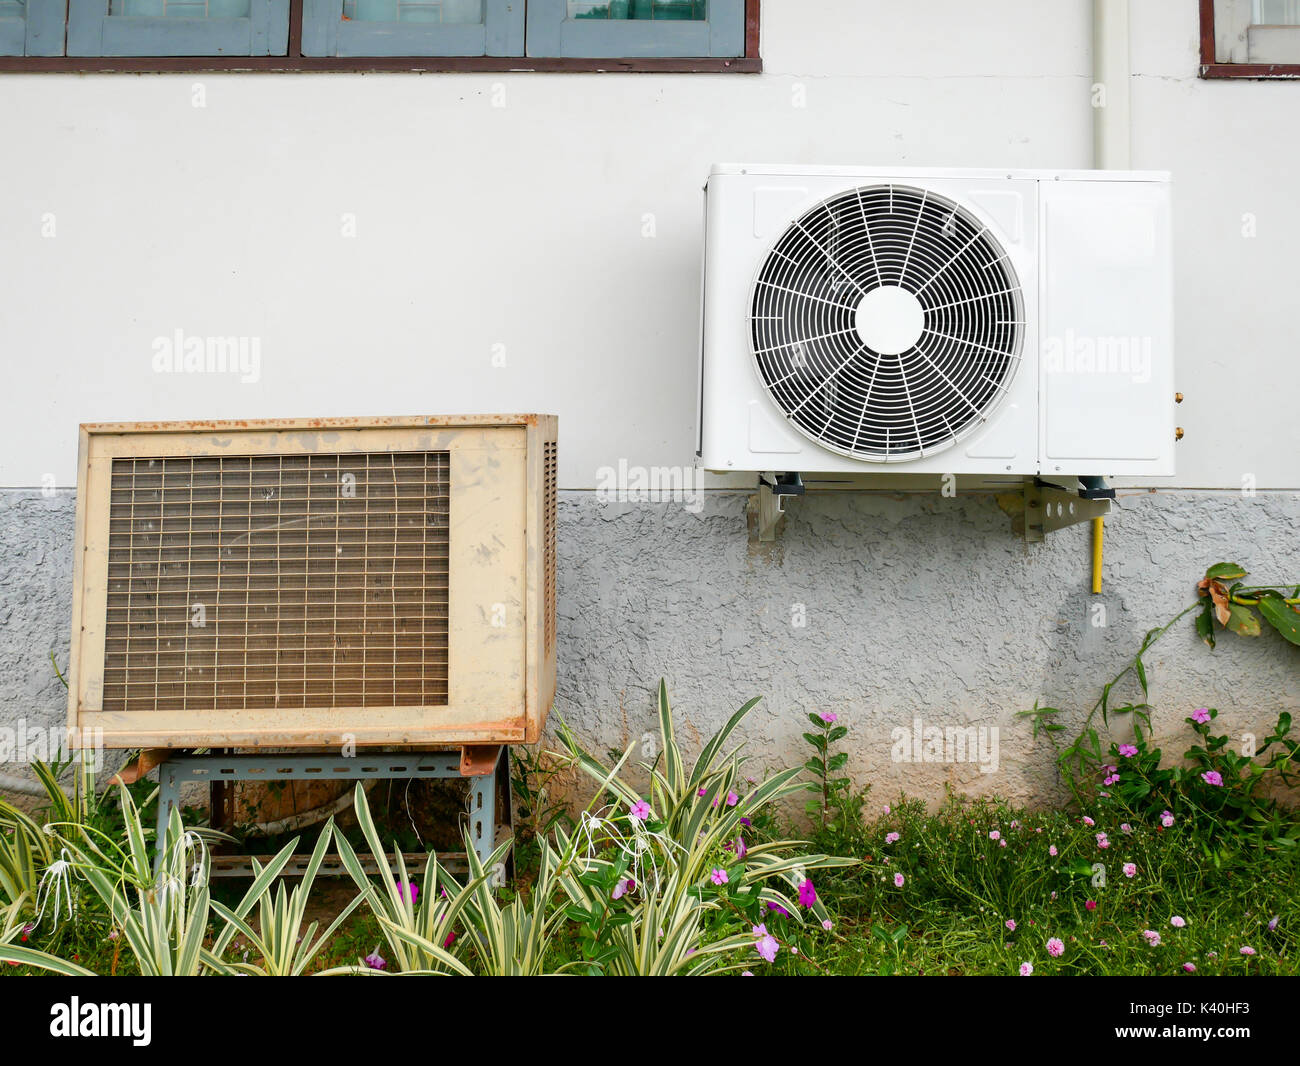 New Air Conditioner Condenser And Old Air Conditioner Condenser Unit Standing Outdoors Stock Photo Alamy